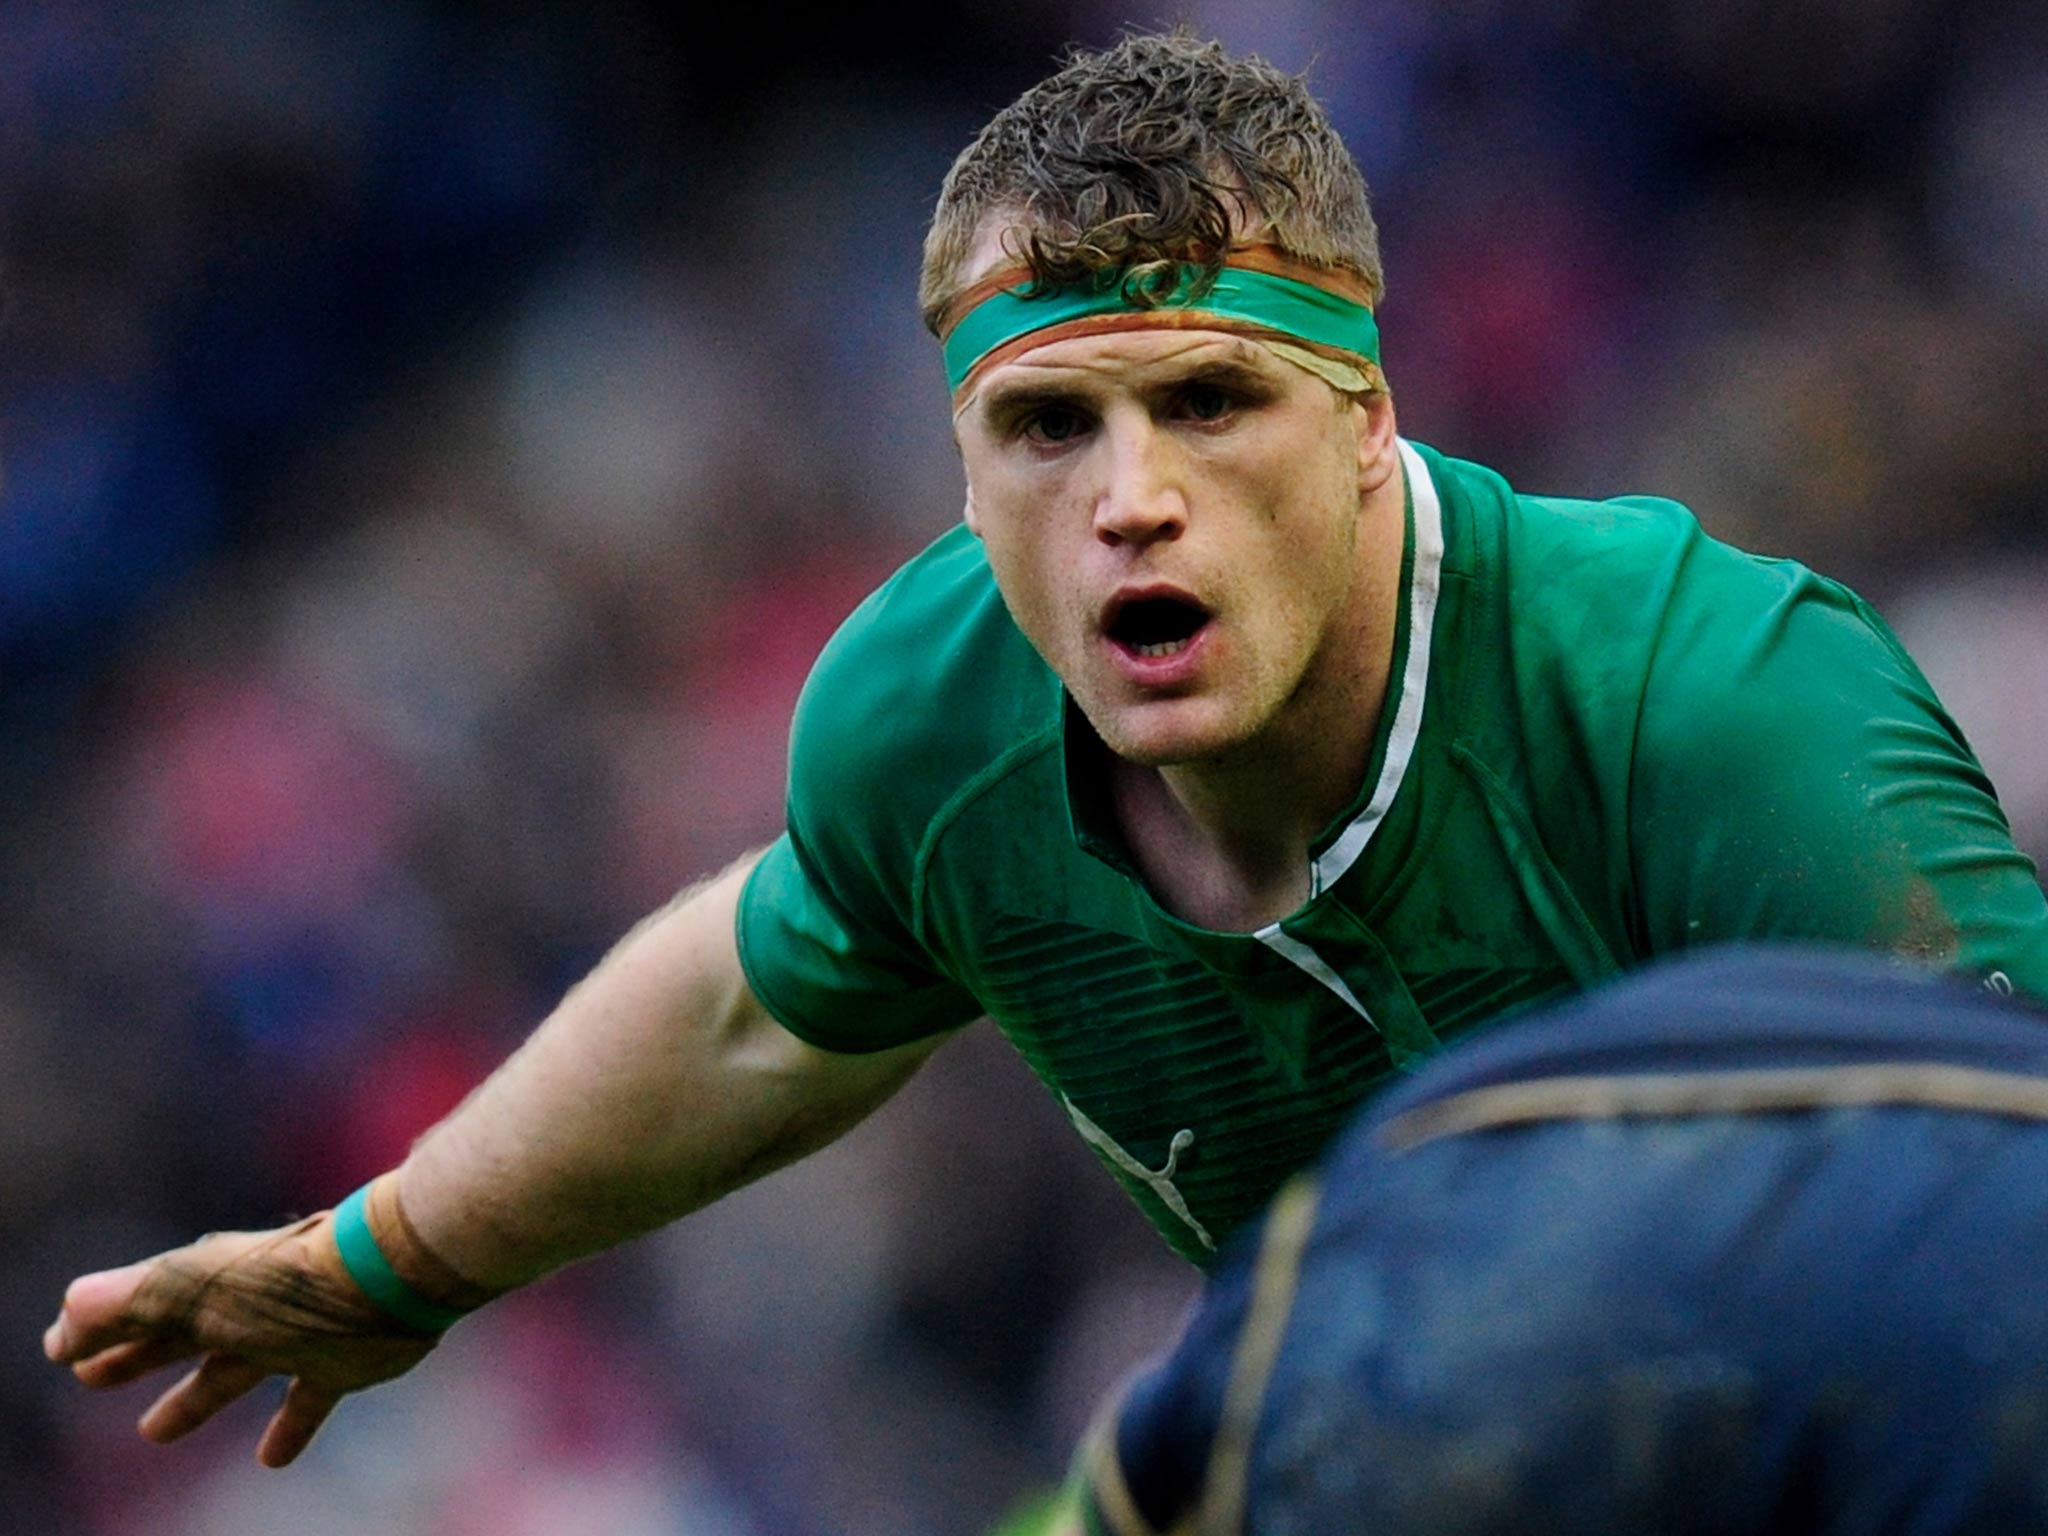 8 Jamie Heaslip (Ireland) He did not have the best game at the weekend but no one is really putting their hand up at No 8. I like David Denton but he is not even starting for Scotland at the moment. There is not an outstanding candidate as it